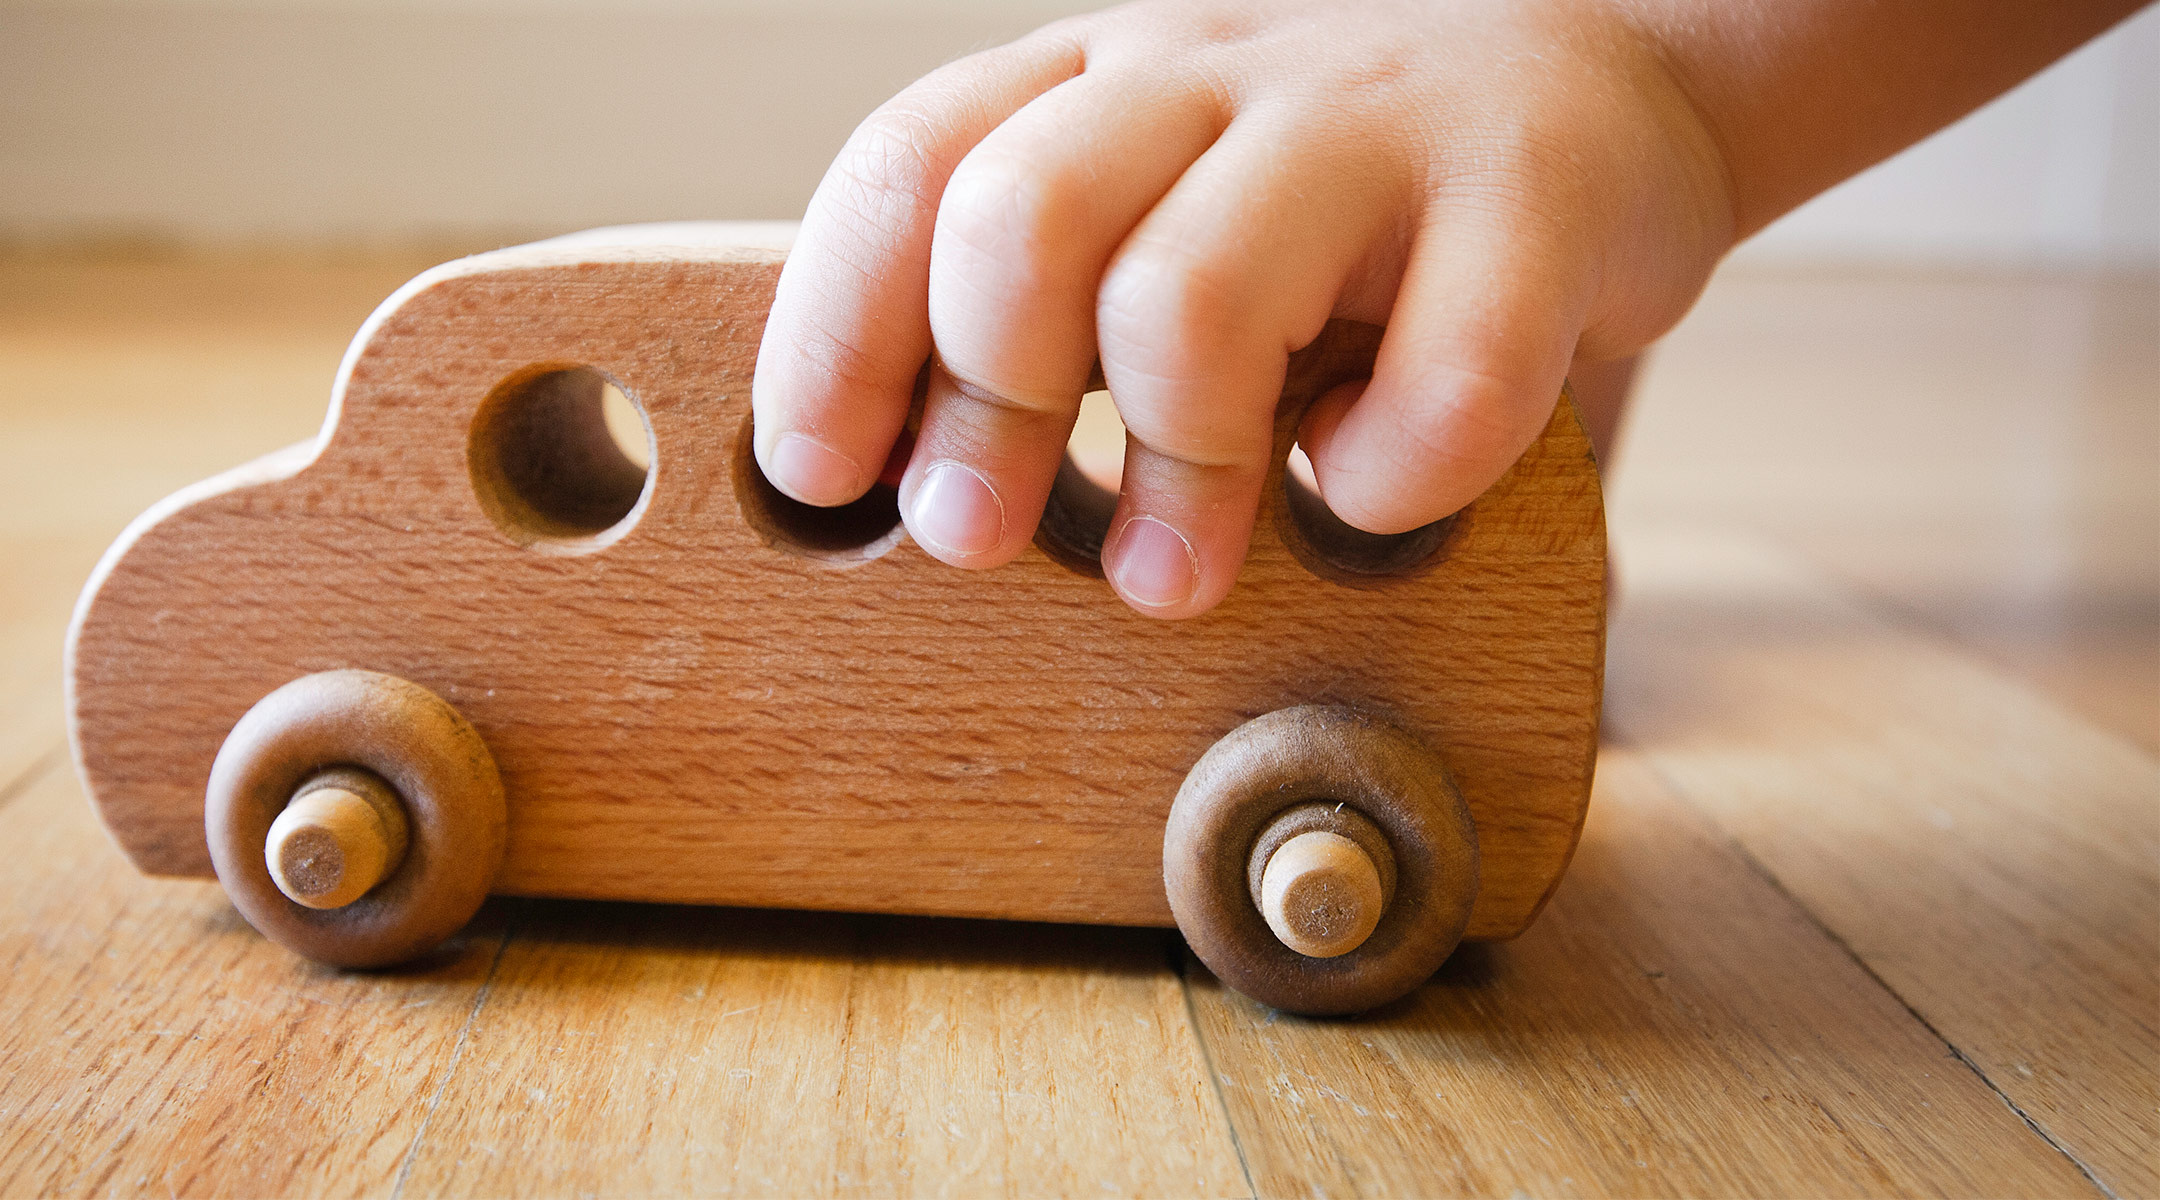 toddler hand playing with wooden toy car